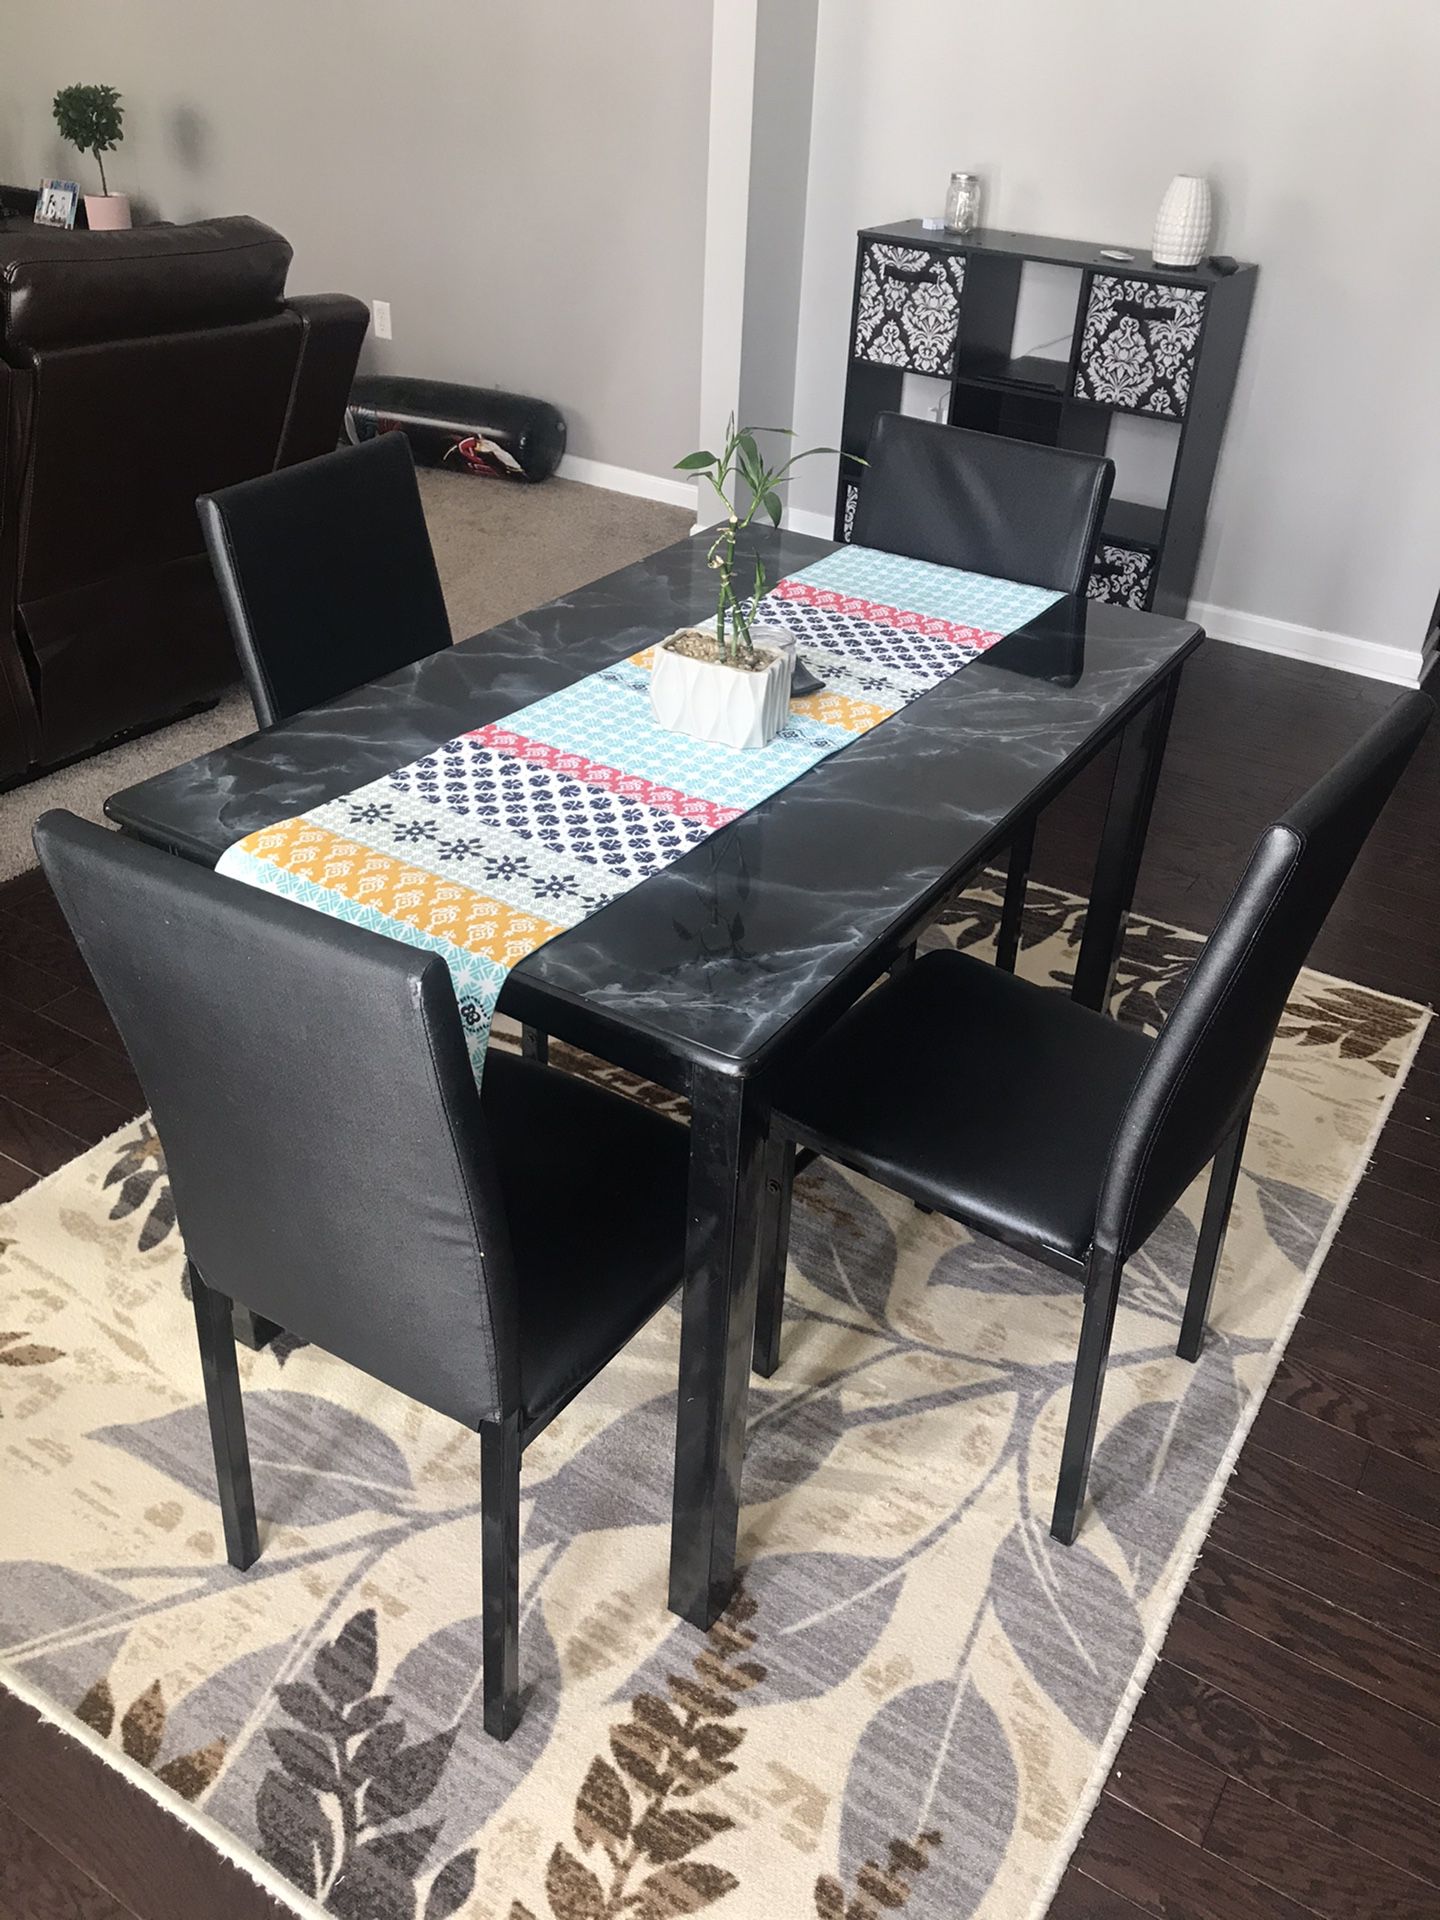 Nice dinning table with 4 chairs